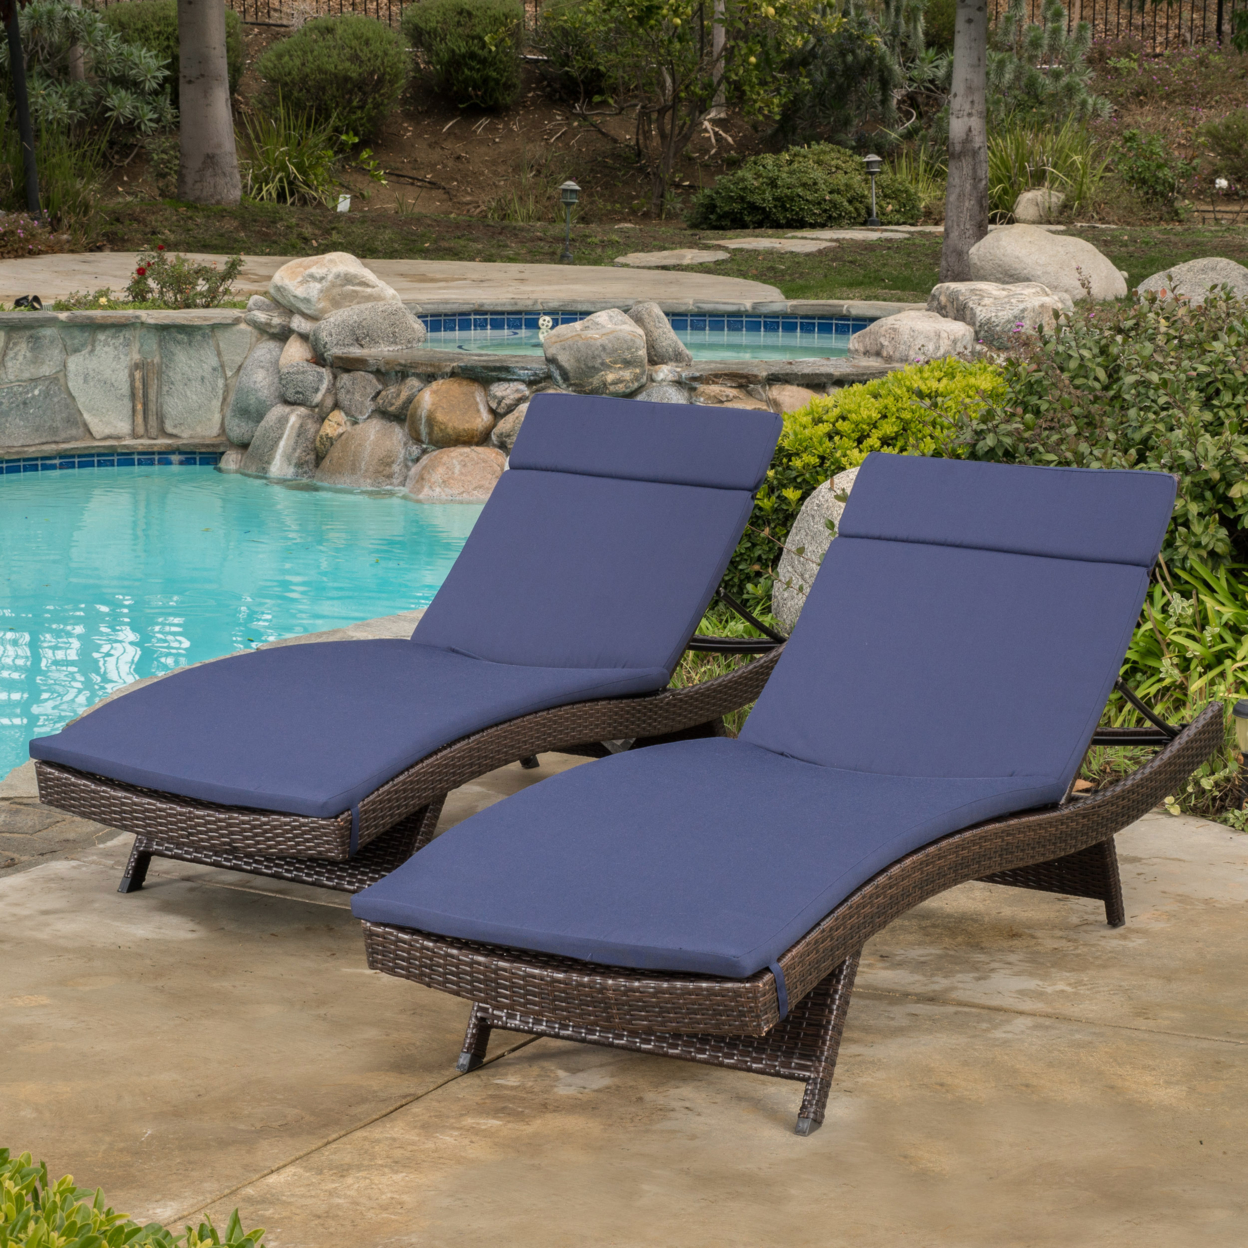 Lakeport Outdoor Adjustable Chaise Lounge Chairs With Cushions (set Of 2) - Textured Beige Cushion